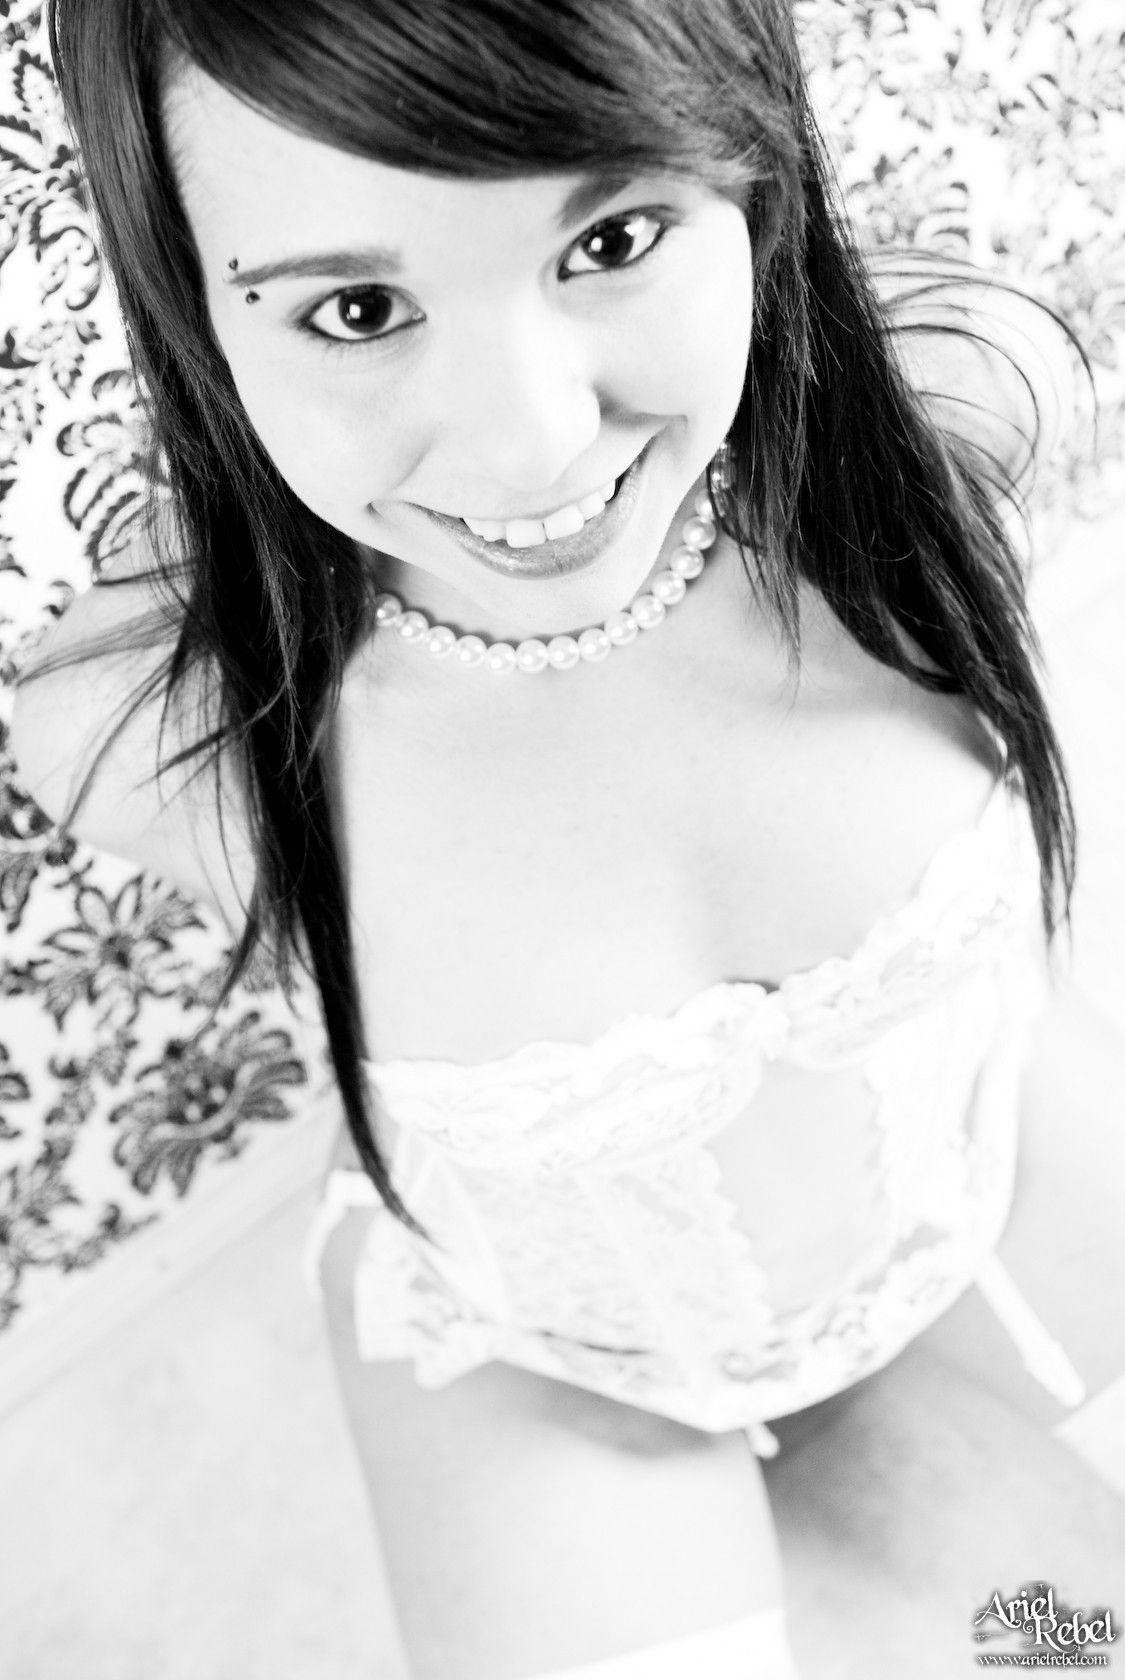 Pictures of Ariel Rebel looking vintage in black and white #53299768